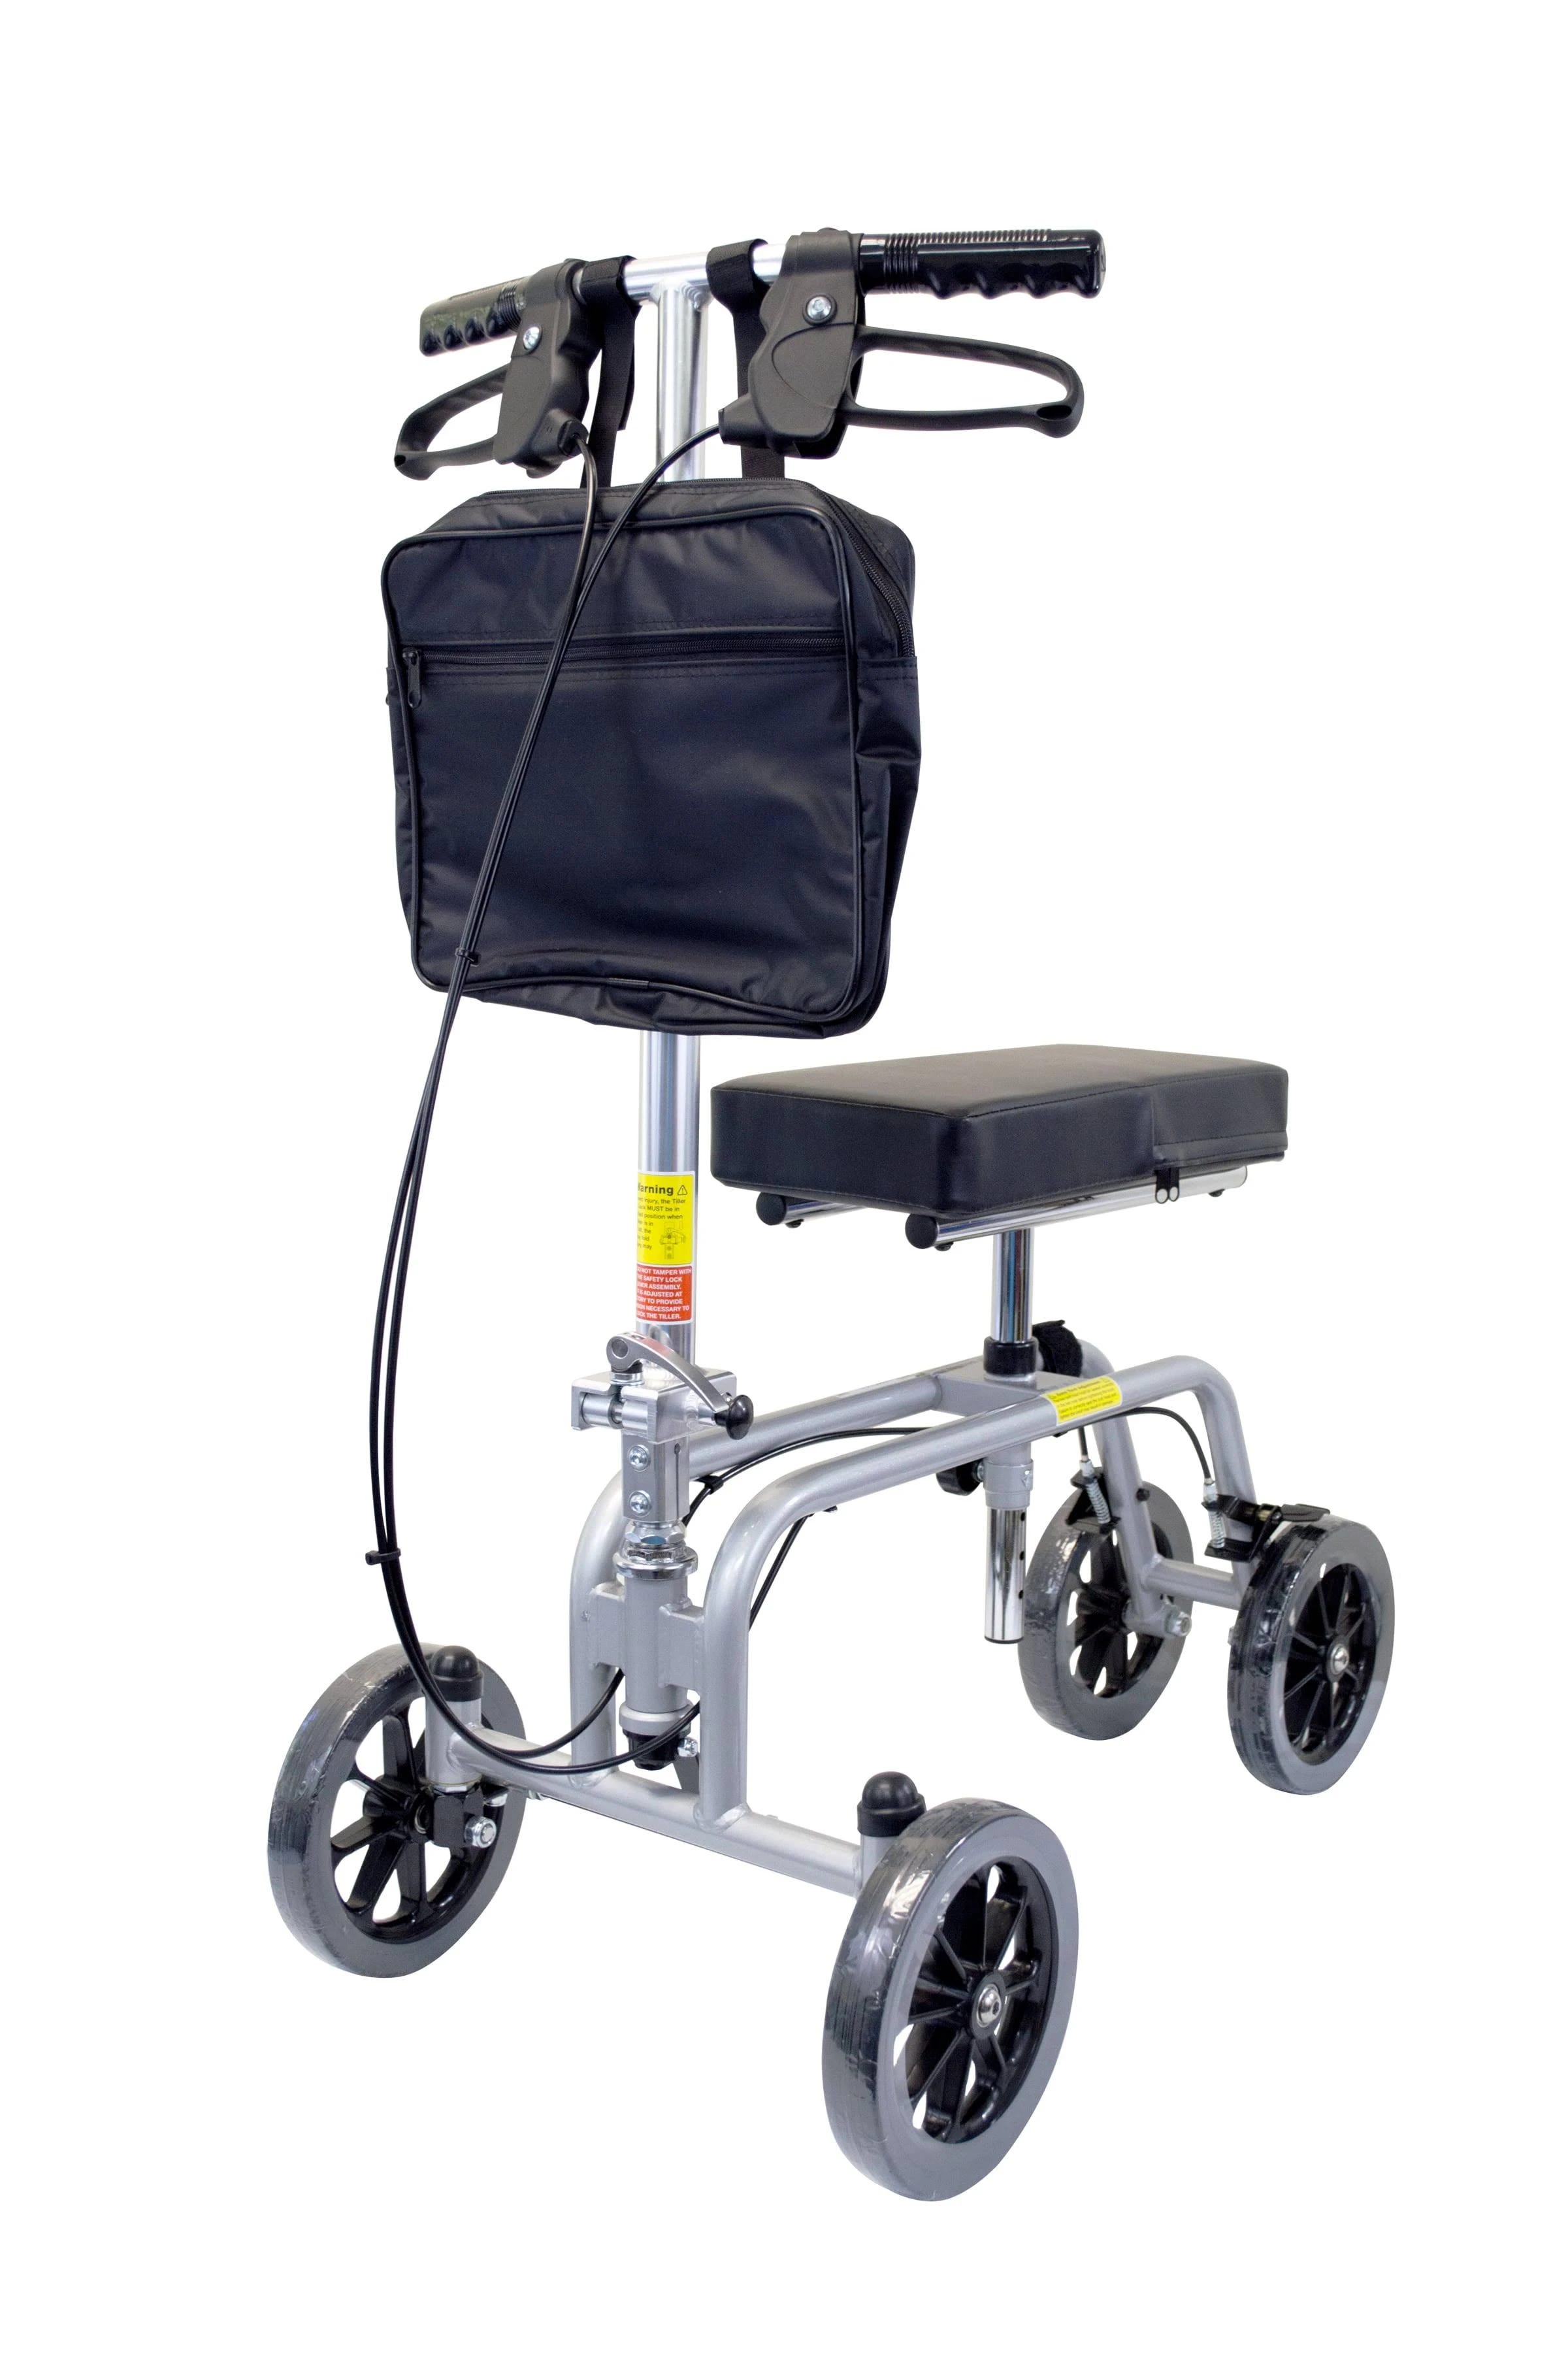 Ergonomic Free Spirit Knee Walker - Steel Frame with Adjustable Height and Padded Knee Support for Easy Mobility | Image